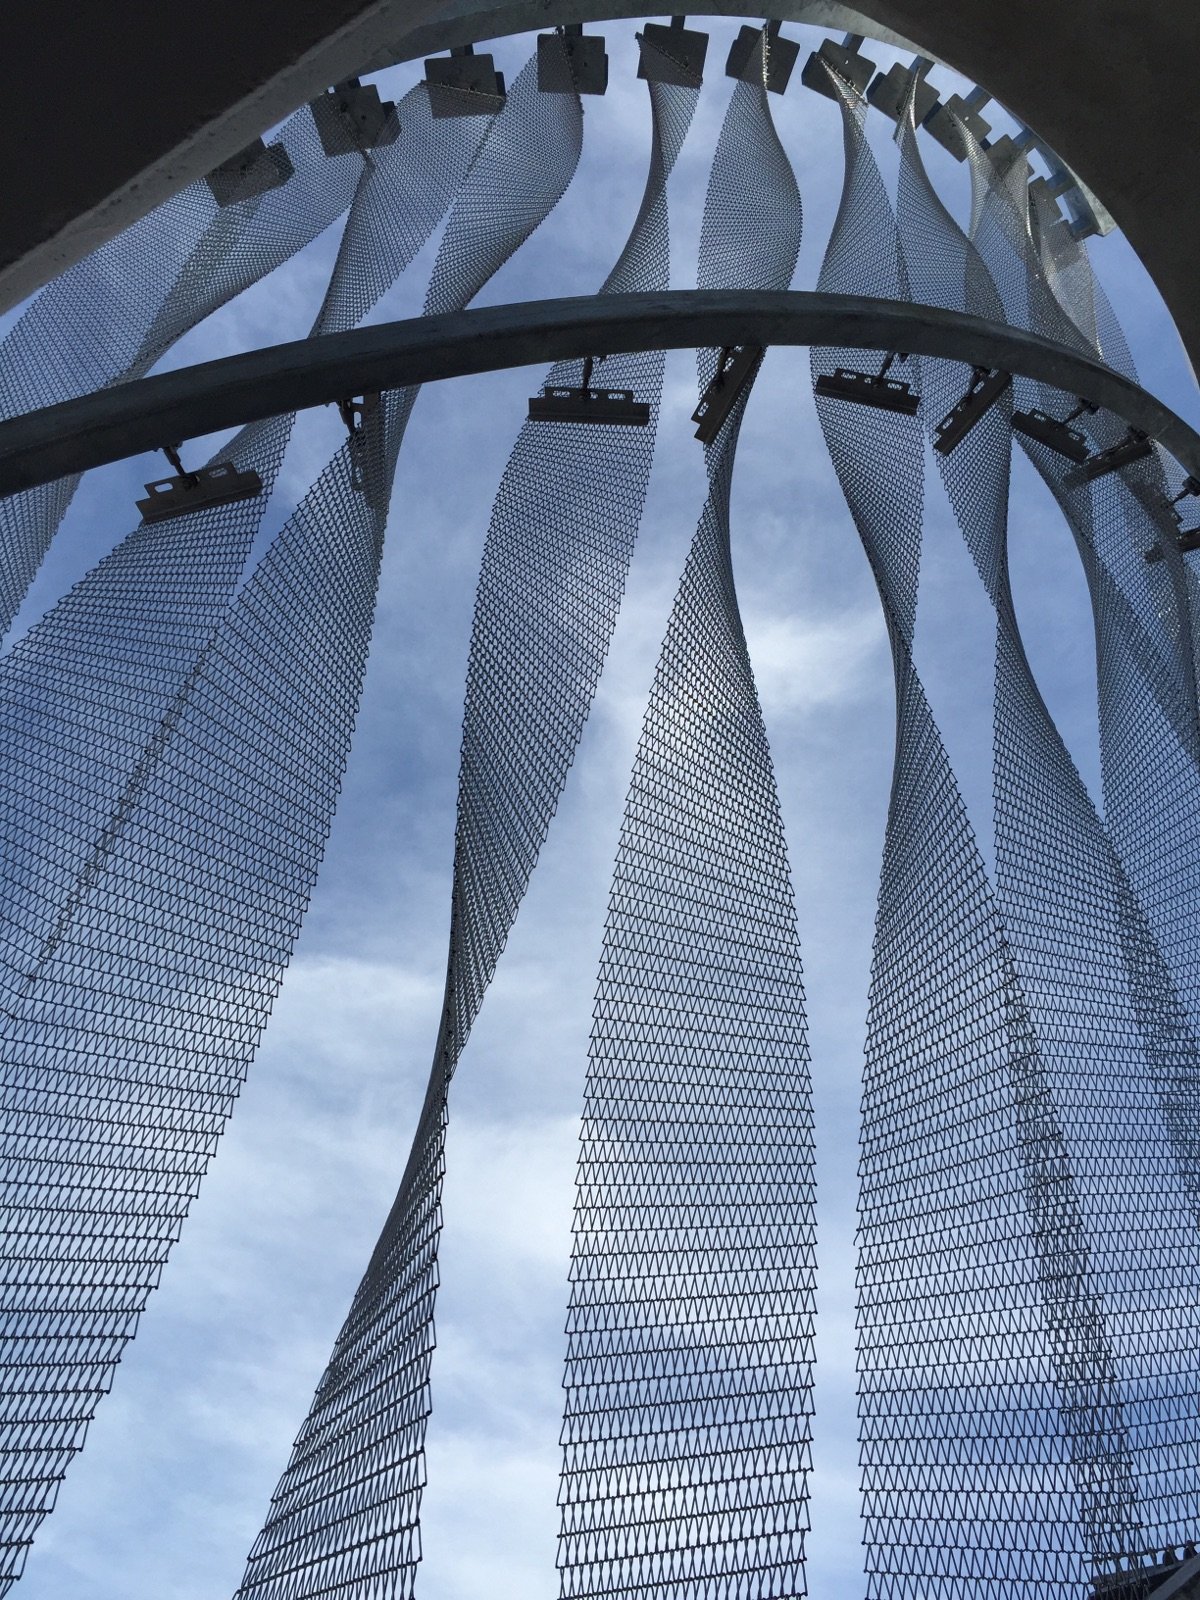  The architect selected a twisted stainless-steel mesh material. Encompassing over 9,000 linear feet, the panels are held together by 250,000 individual welds completed by hand by the panel manufacturer’s fabrication team 